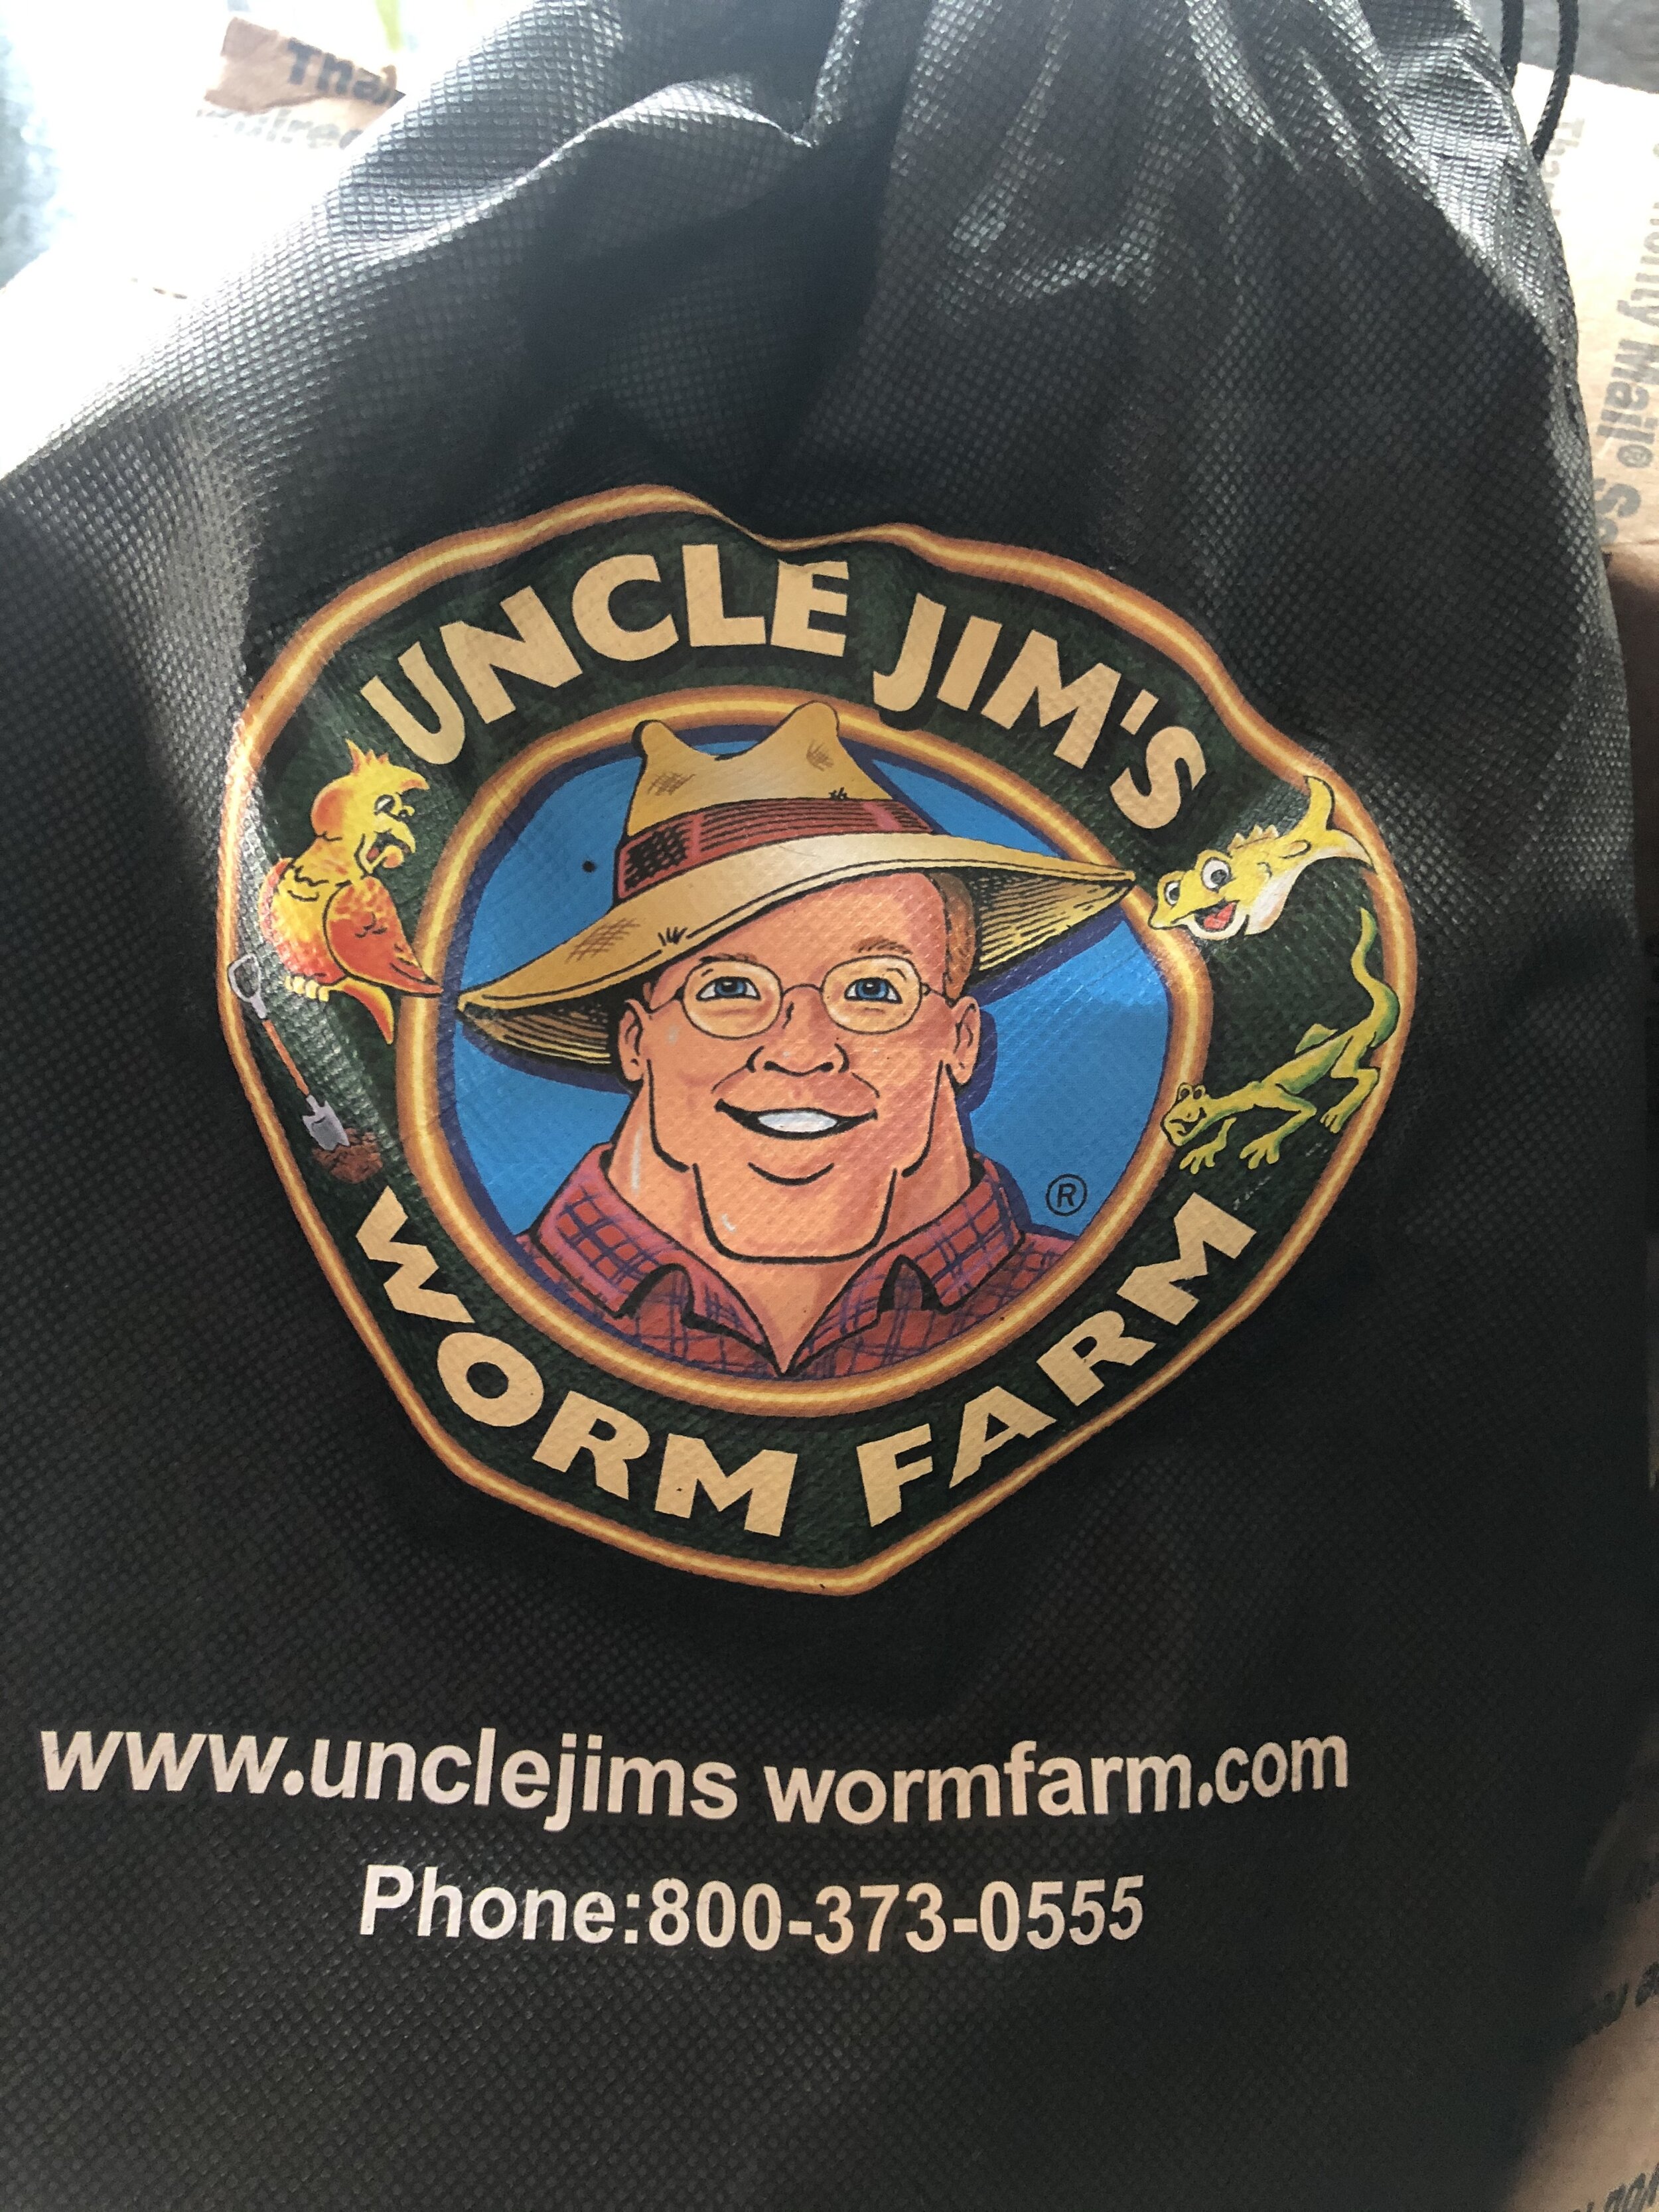 Stainless Steel Compost Pail - Uncle Jim's Worm Farm